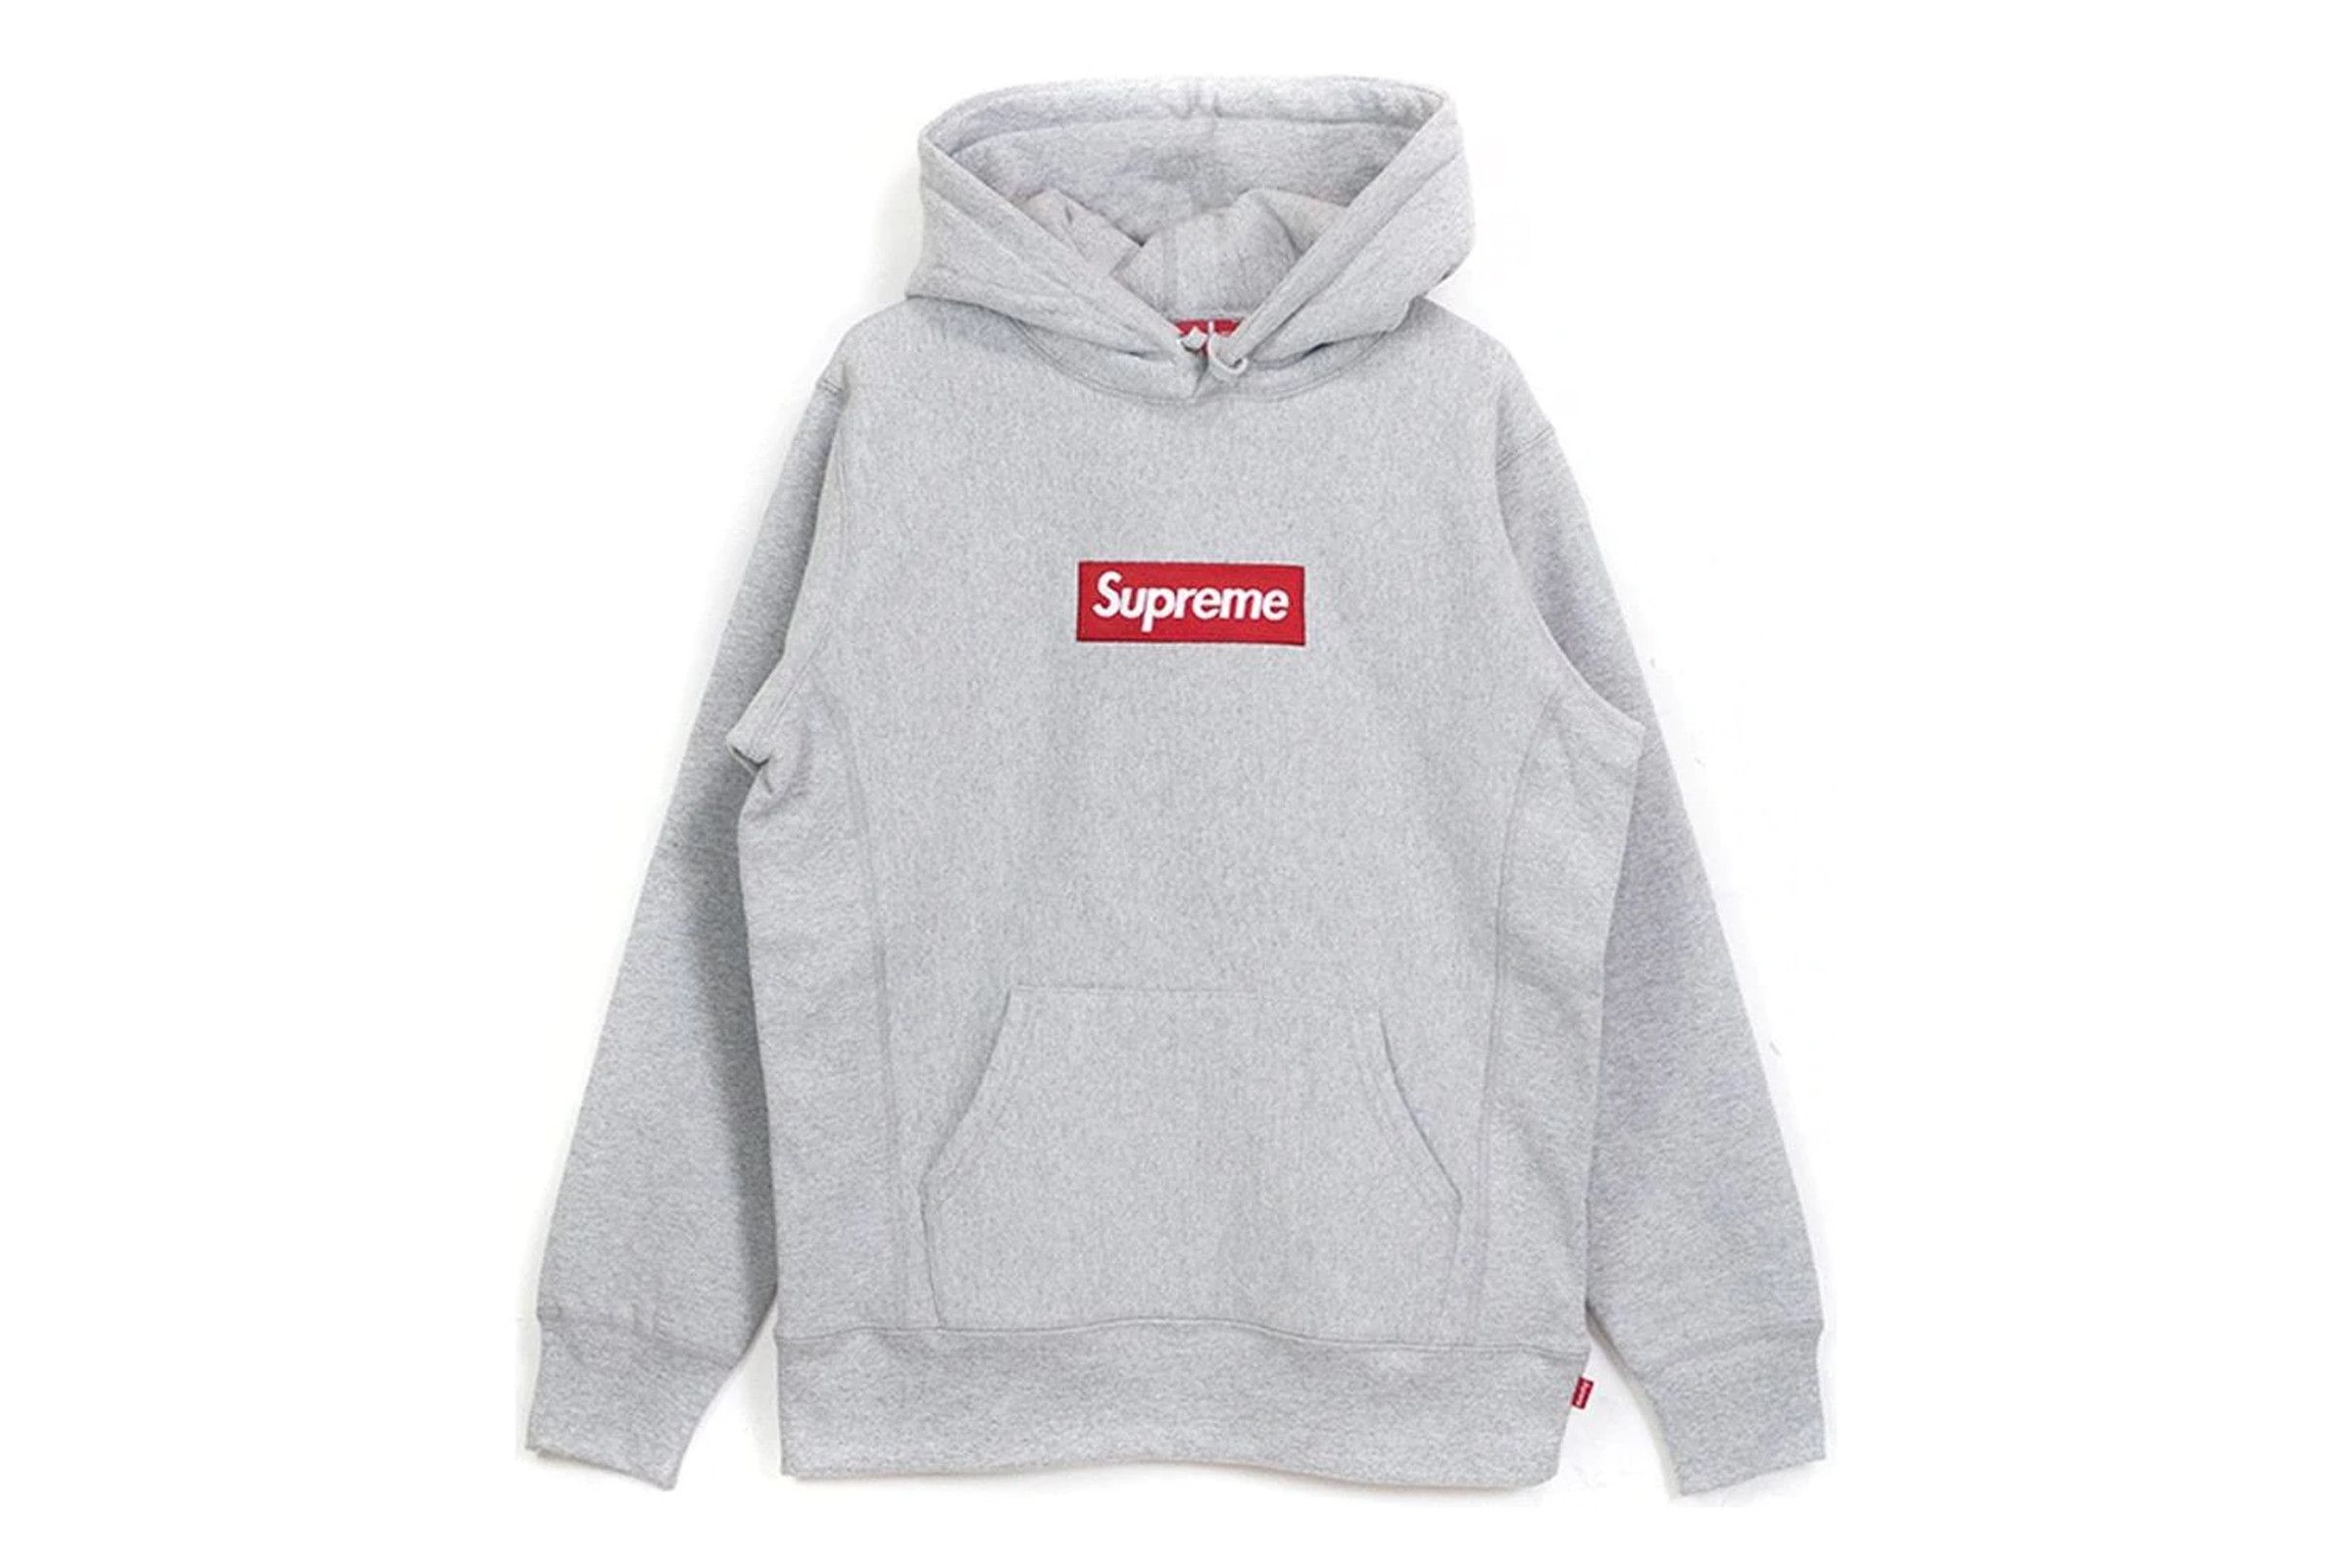 supreme box logo hoodie On Sale - Authenticated Resale